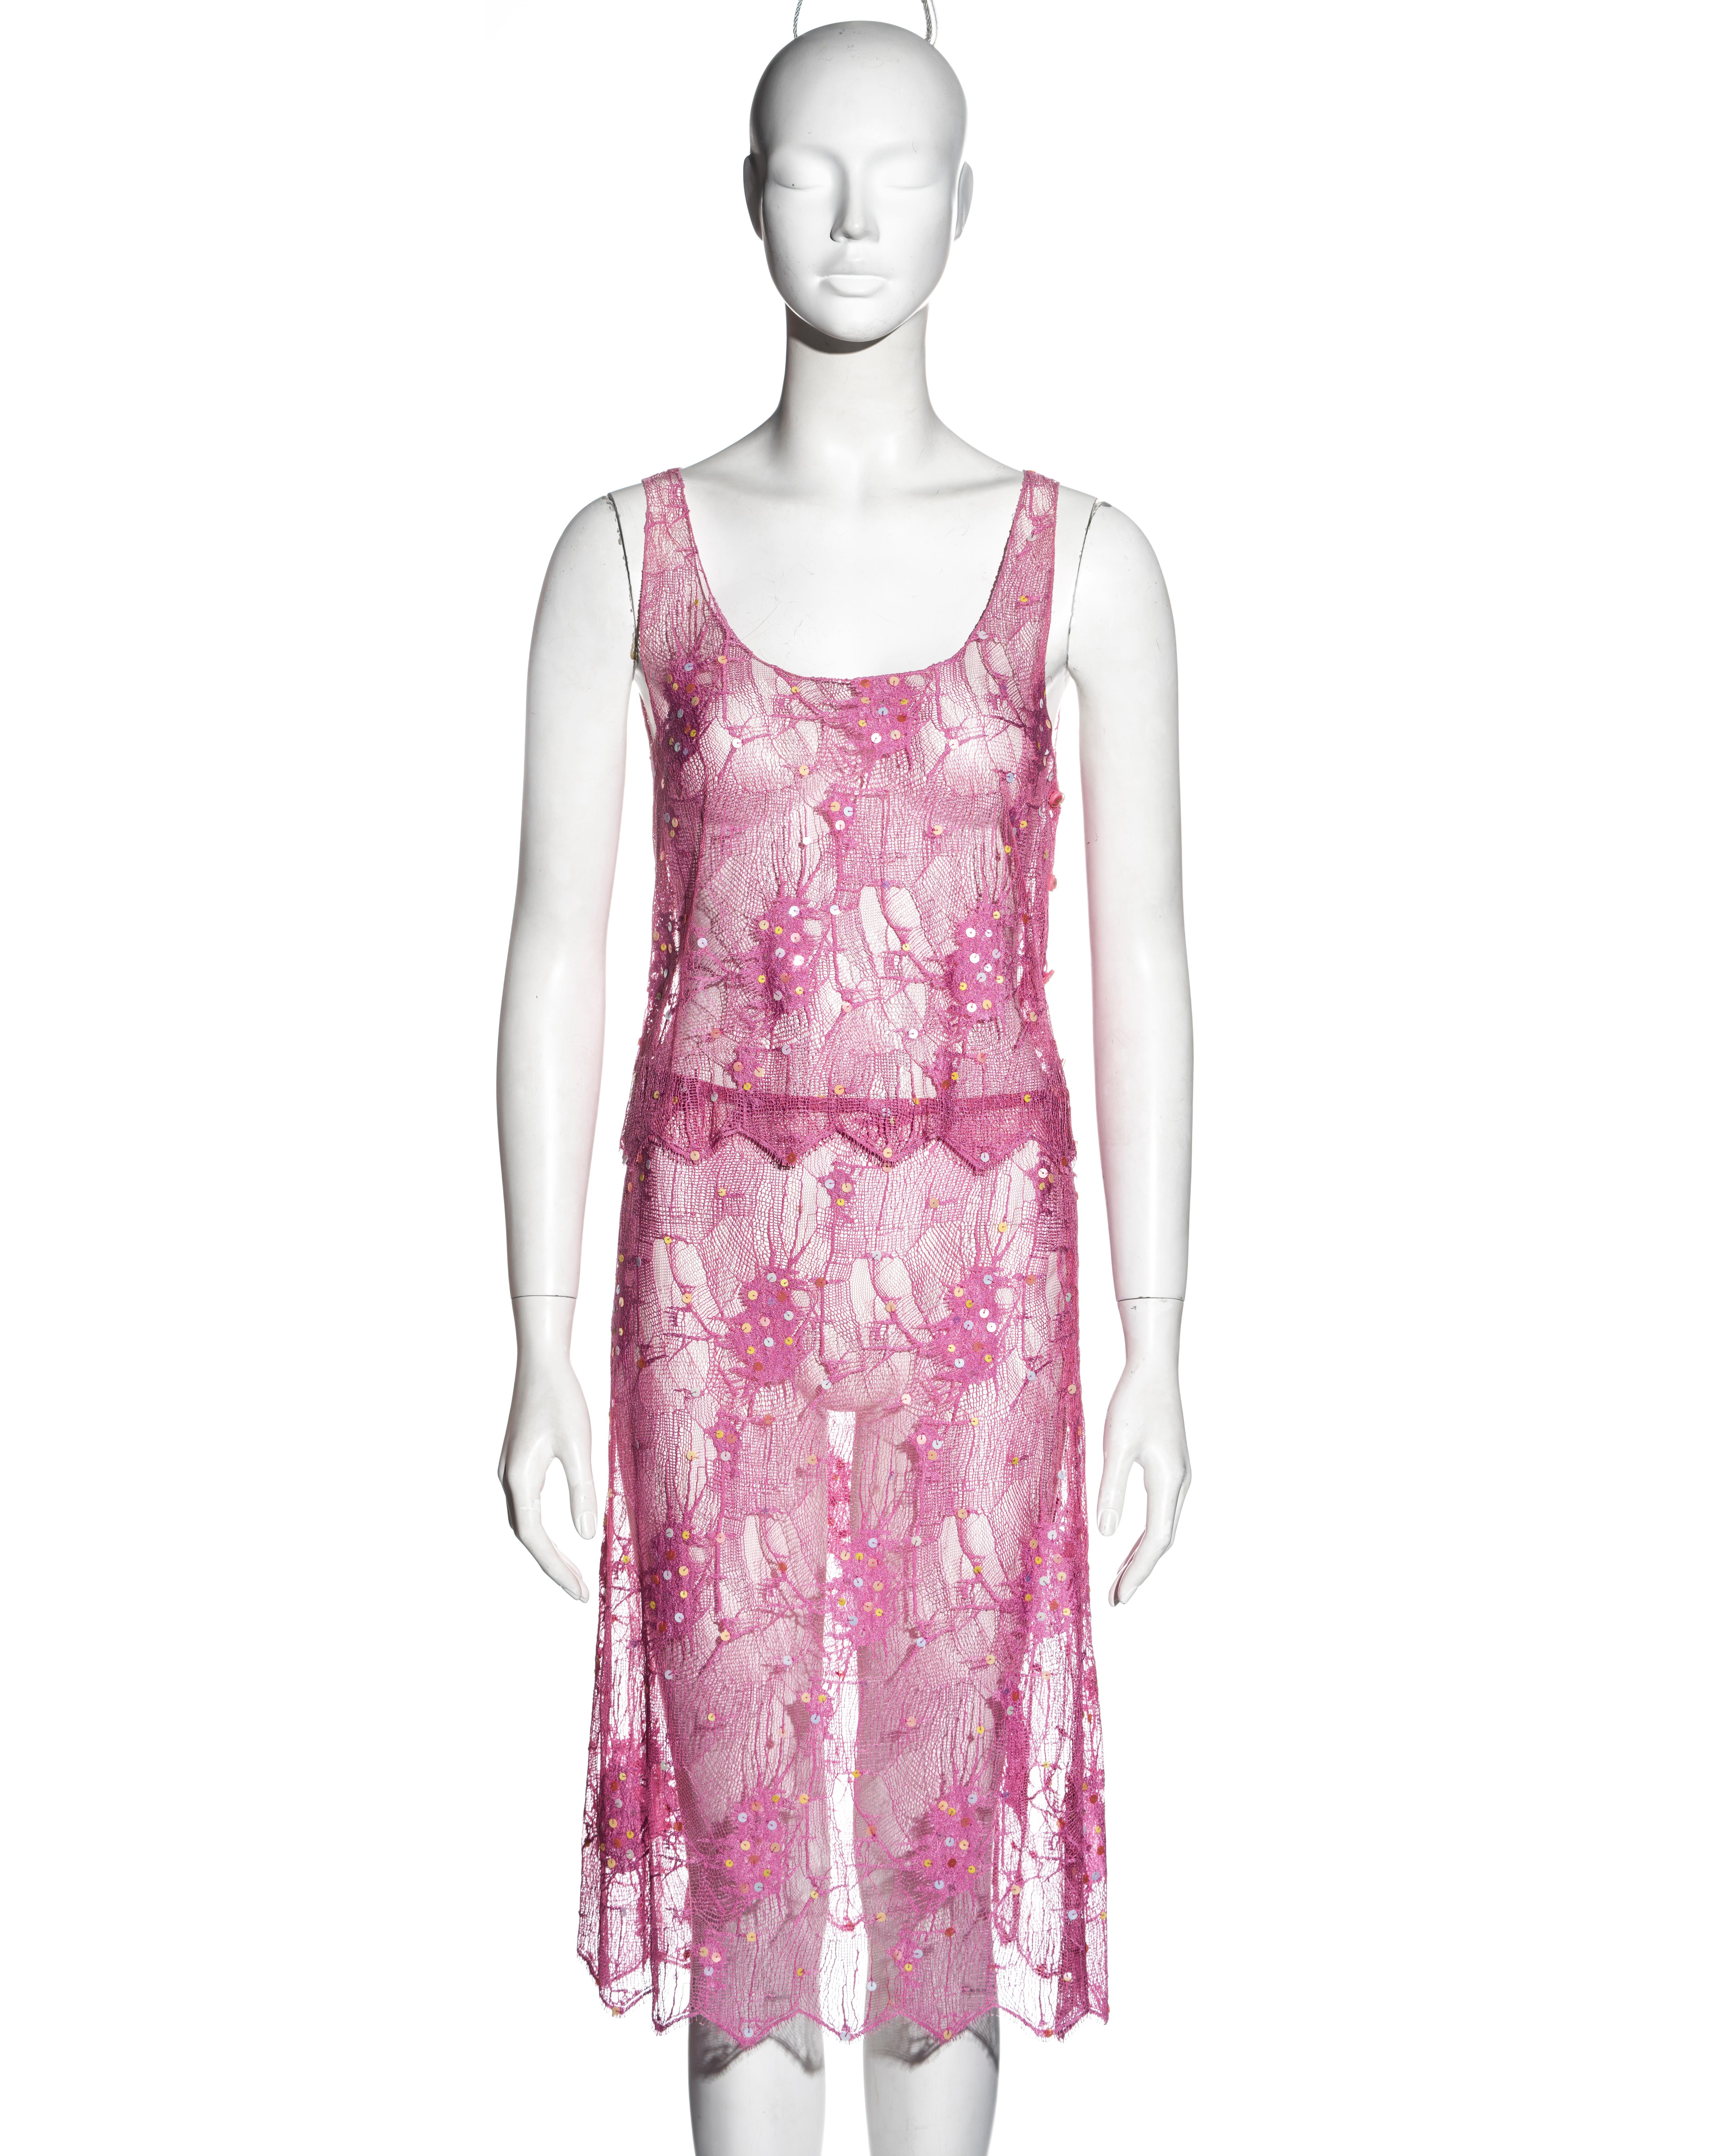 ▪ Chanel pink lace top and skirt 
▪ Designed by Karl Lagerfeld
▪ Pink lace with sequins
▪ Sleeveless top 
▪ Mid-length skirt 
▪ Scalloped hemline 
▪ Five 'CC' logo buttons at the side opening 
▪ FR 38 - UK 10 - US 6
▪ Spring-Summer 2000
▪ 75% Nylon,